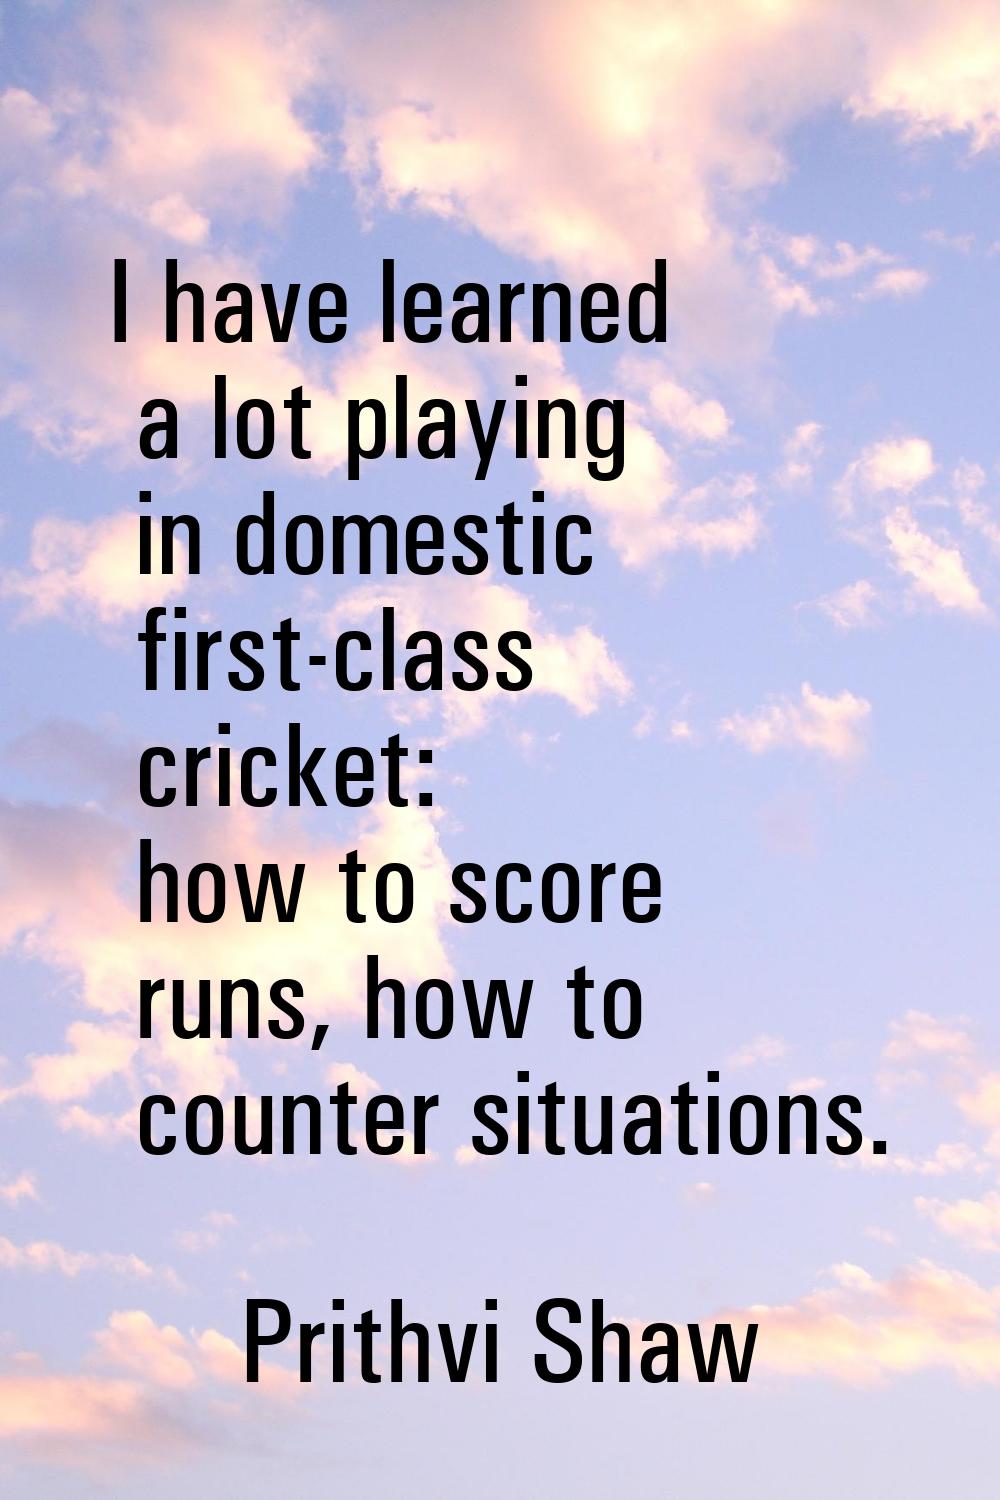 I have learned a lot playing in domestic first-class cricket: how to score runs, how to counter sit